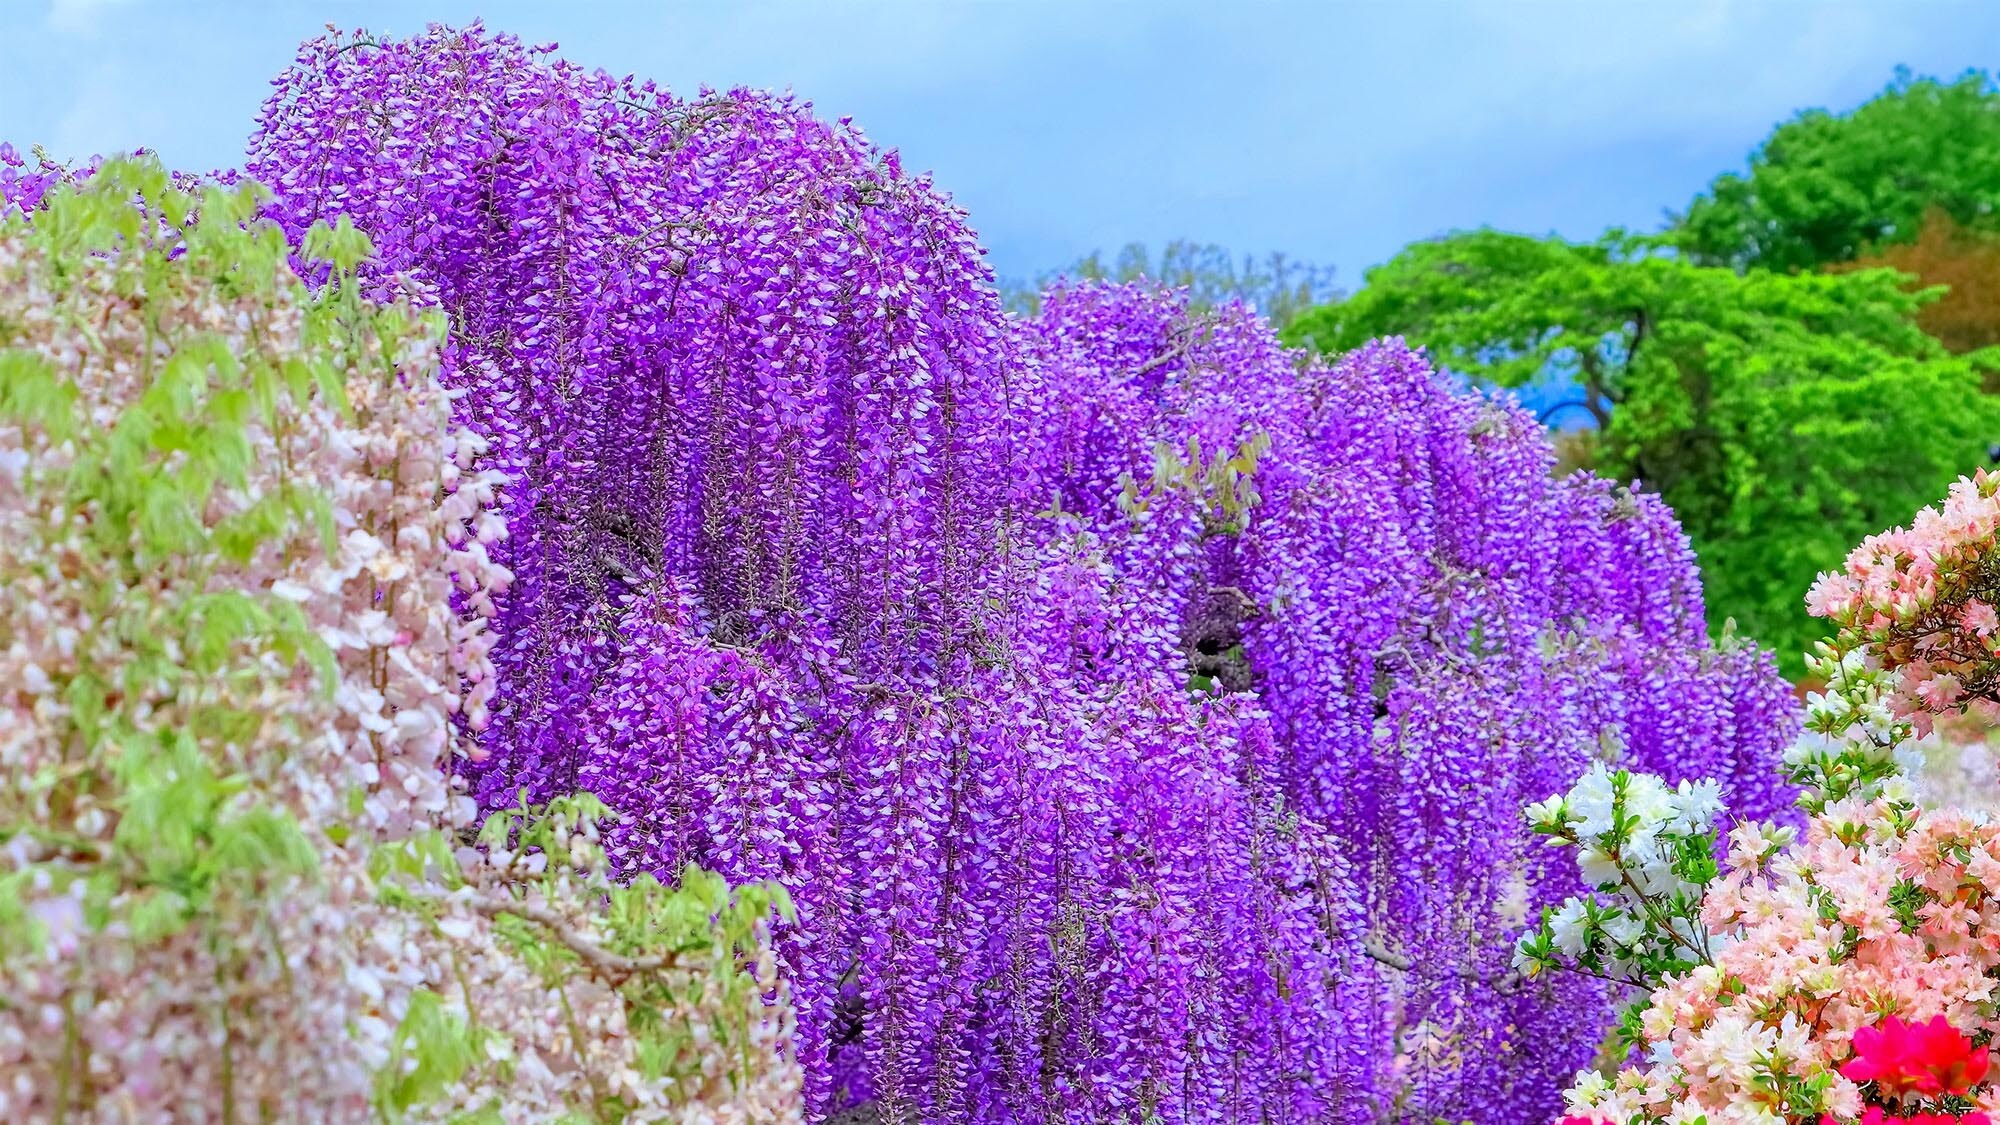 Ashikaga Flower Park / About 95 minutes by car from the inn